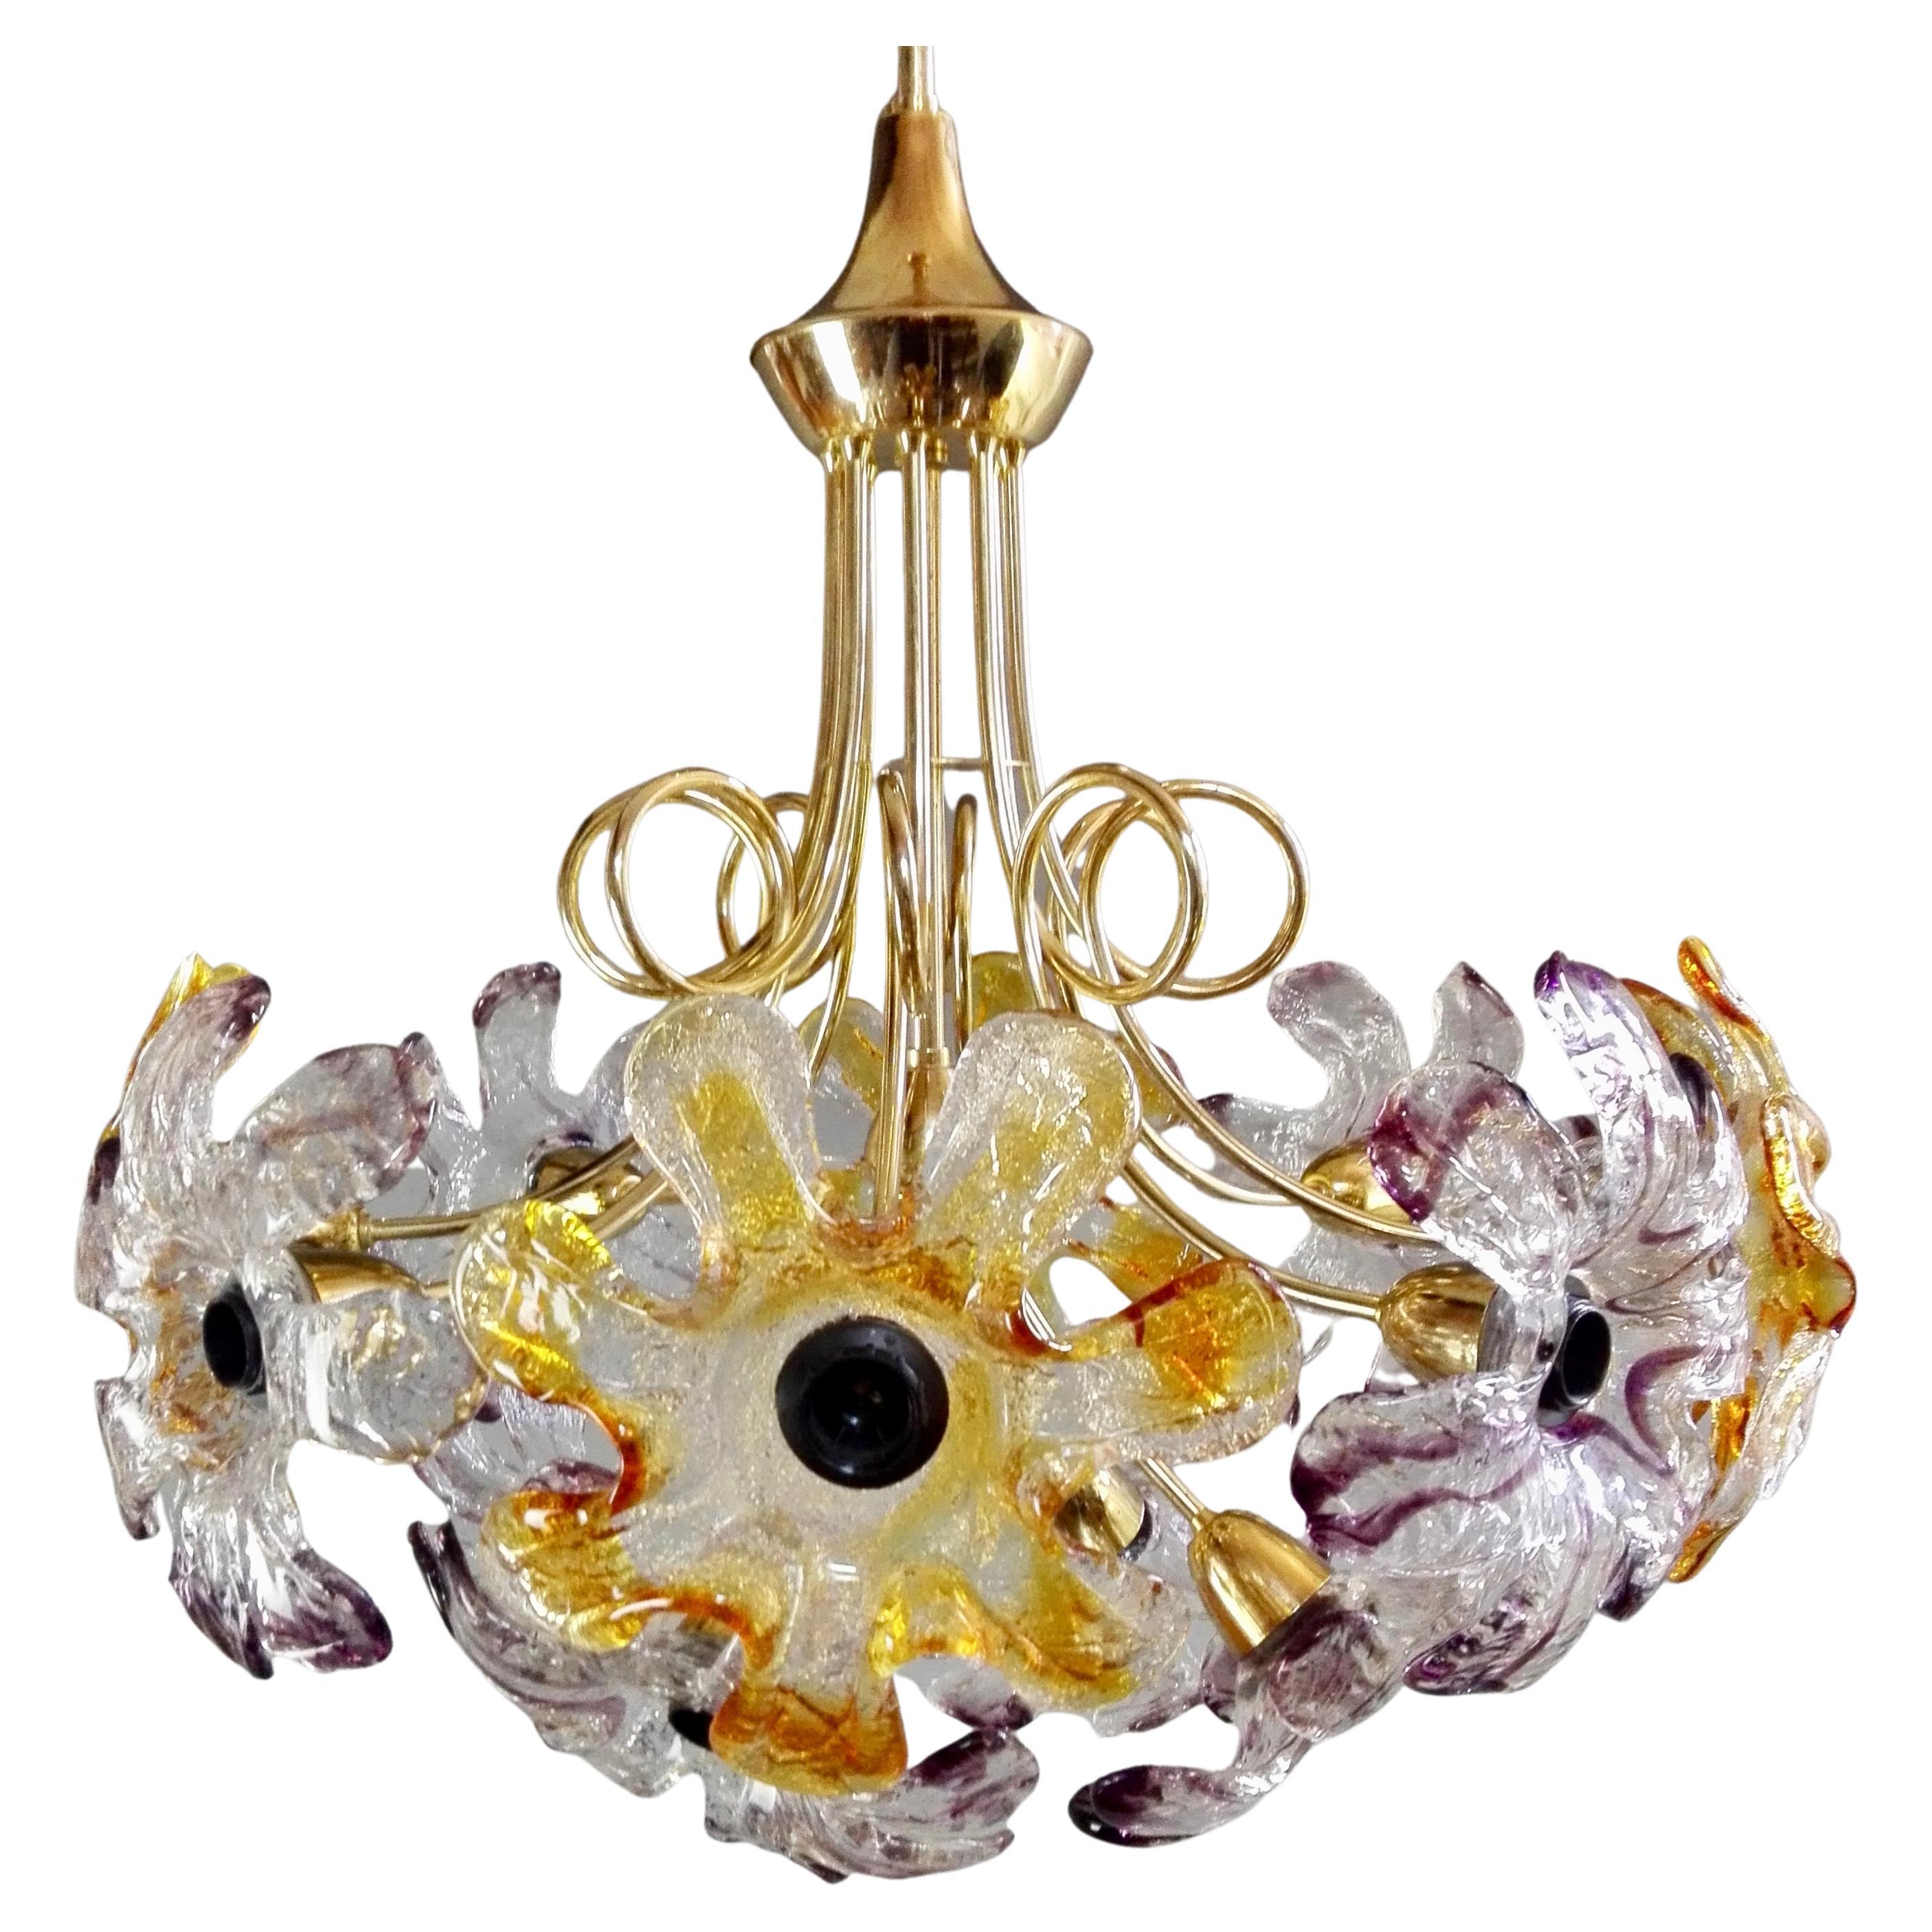 1960s Mazzega Twelve-Light Chandelier with Flower-Shaped Murano Art Glass Shades For Sale